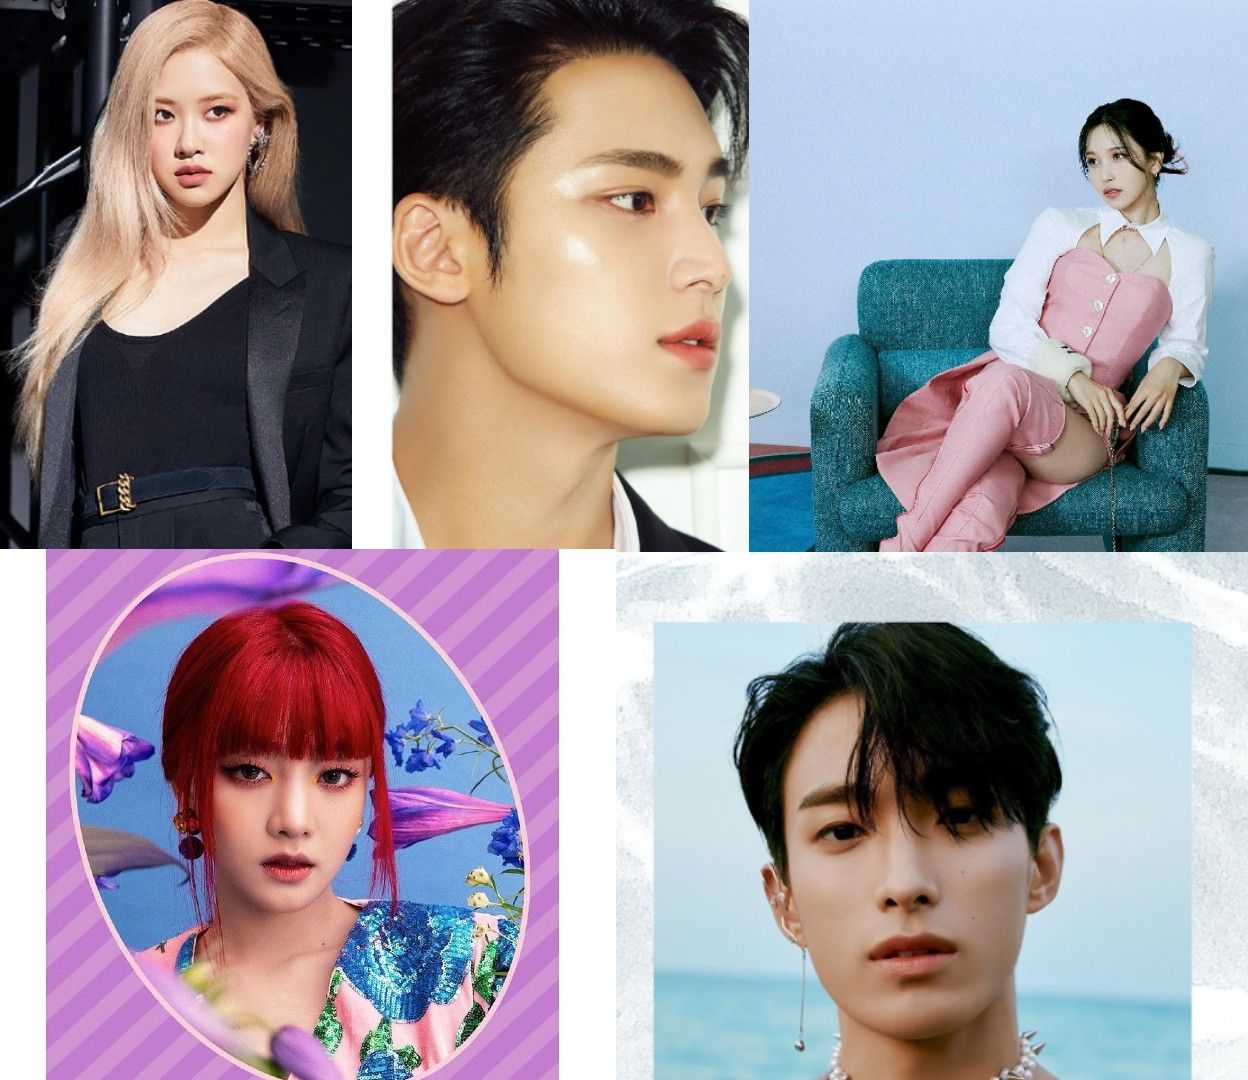  Rose BLACKPINK, Mingyu SEVENTEEN, Mina TWICE, Minnie (G)I-DLE, DK SEVENTEEN / JYPETWICE, Instagram @roses_are_rosie, @saythename_17, @official_g_i_dle